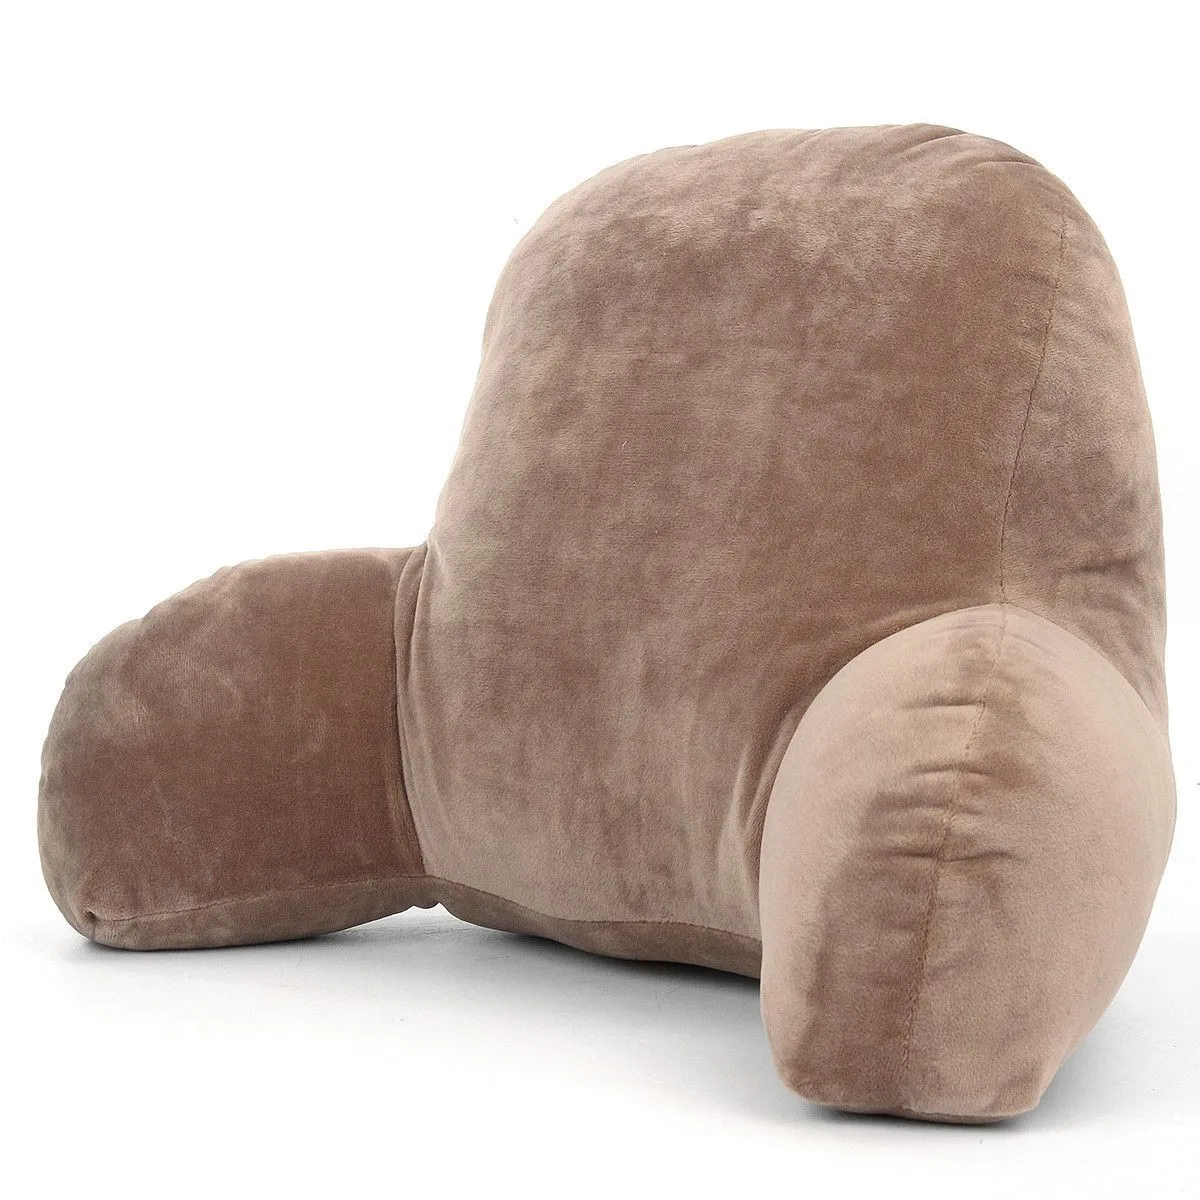 LOUNGER LUMBAR REST BACK PILLOW CUSUSHOION BED CAR OFFICE SOFAサポートアーム安定バックレストベッドサイドチェアシートリーディングピロー2010095859302